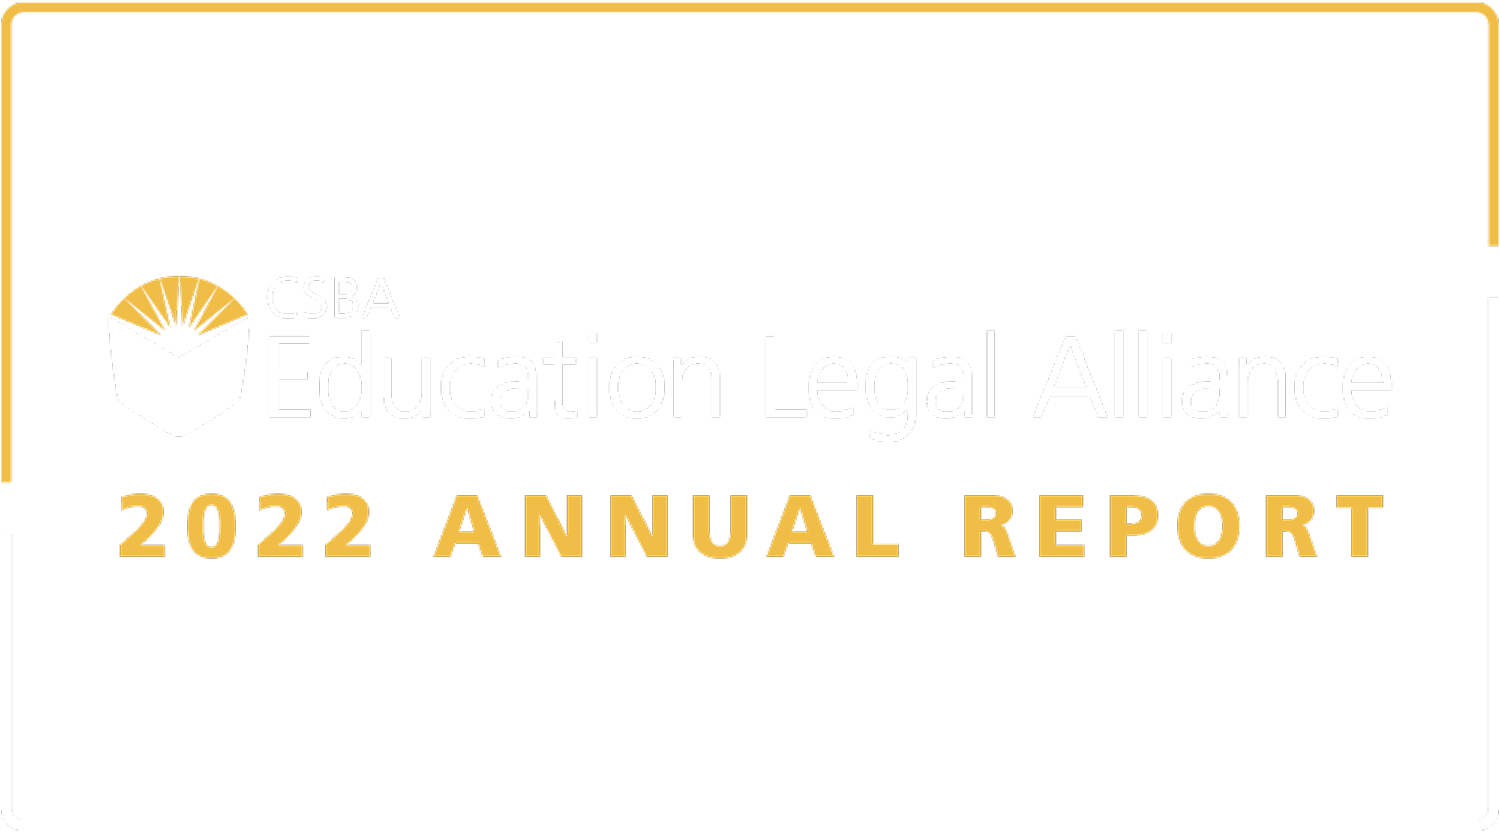 CSBA Education Legal Alliance 2022 Annual Report typography